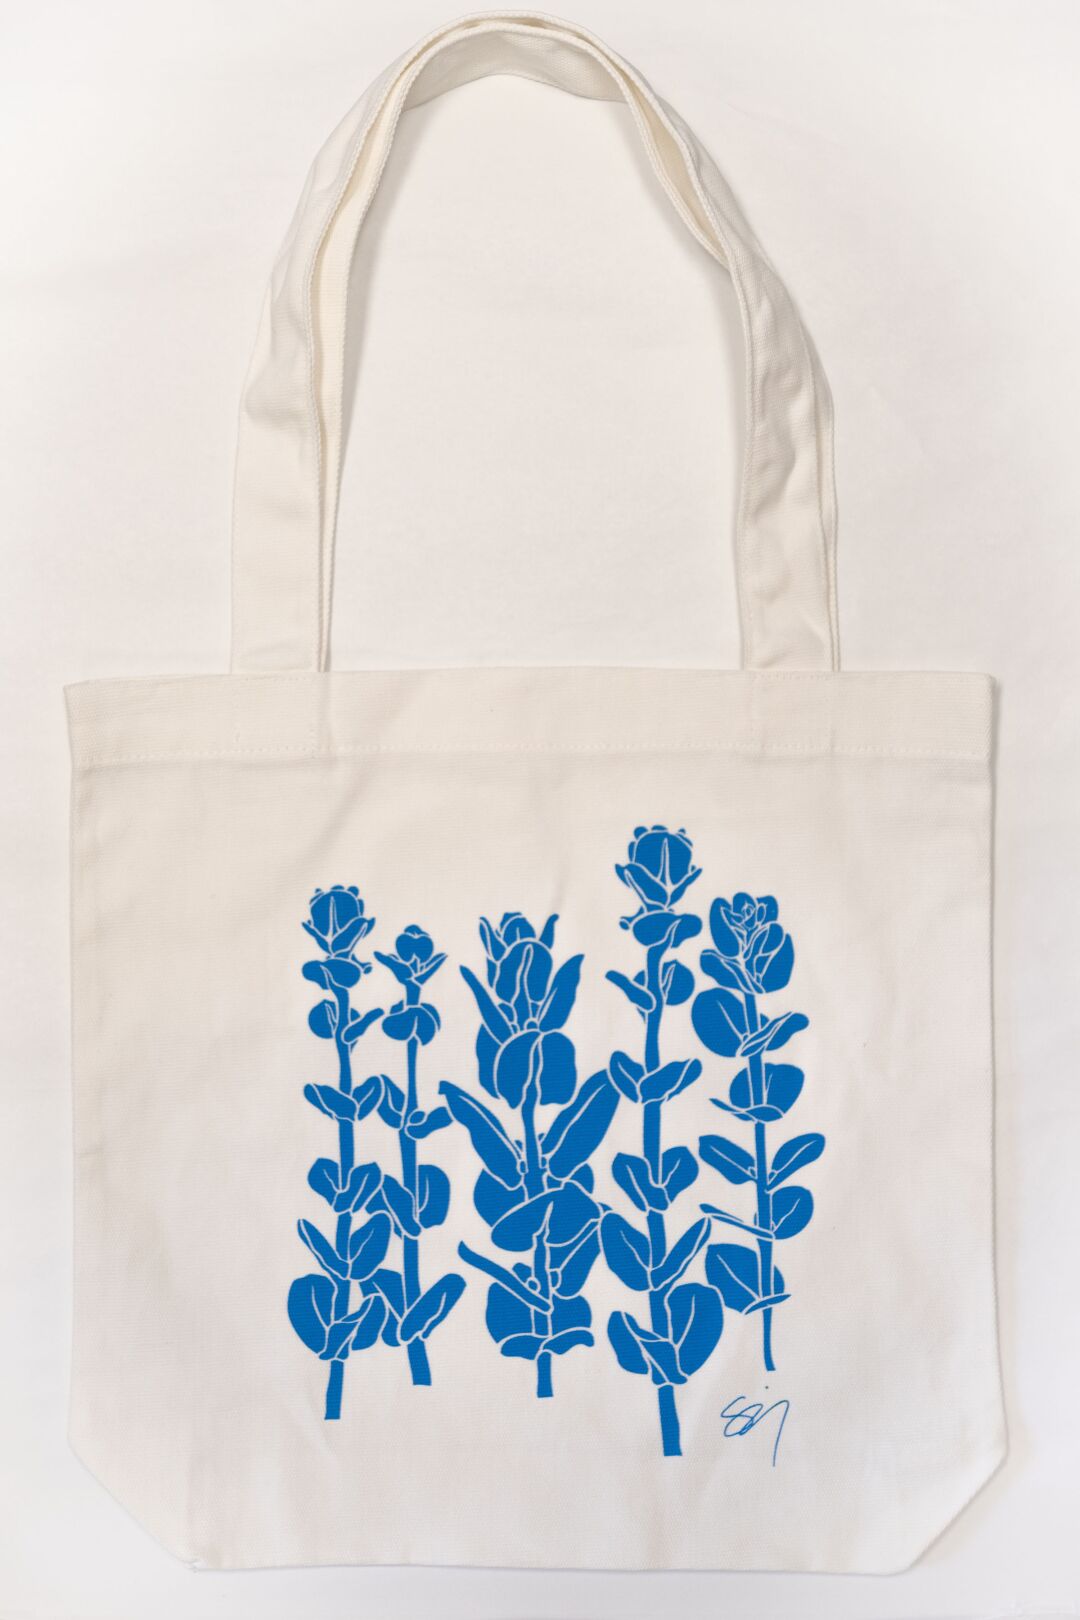 A white tote bag decorated with blue flowers